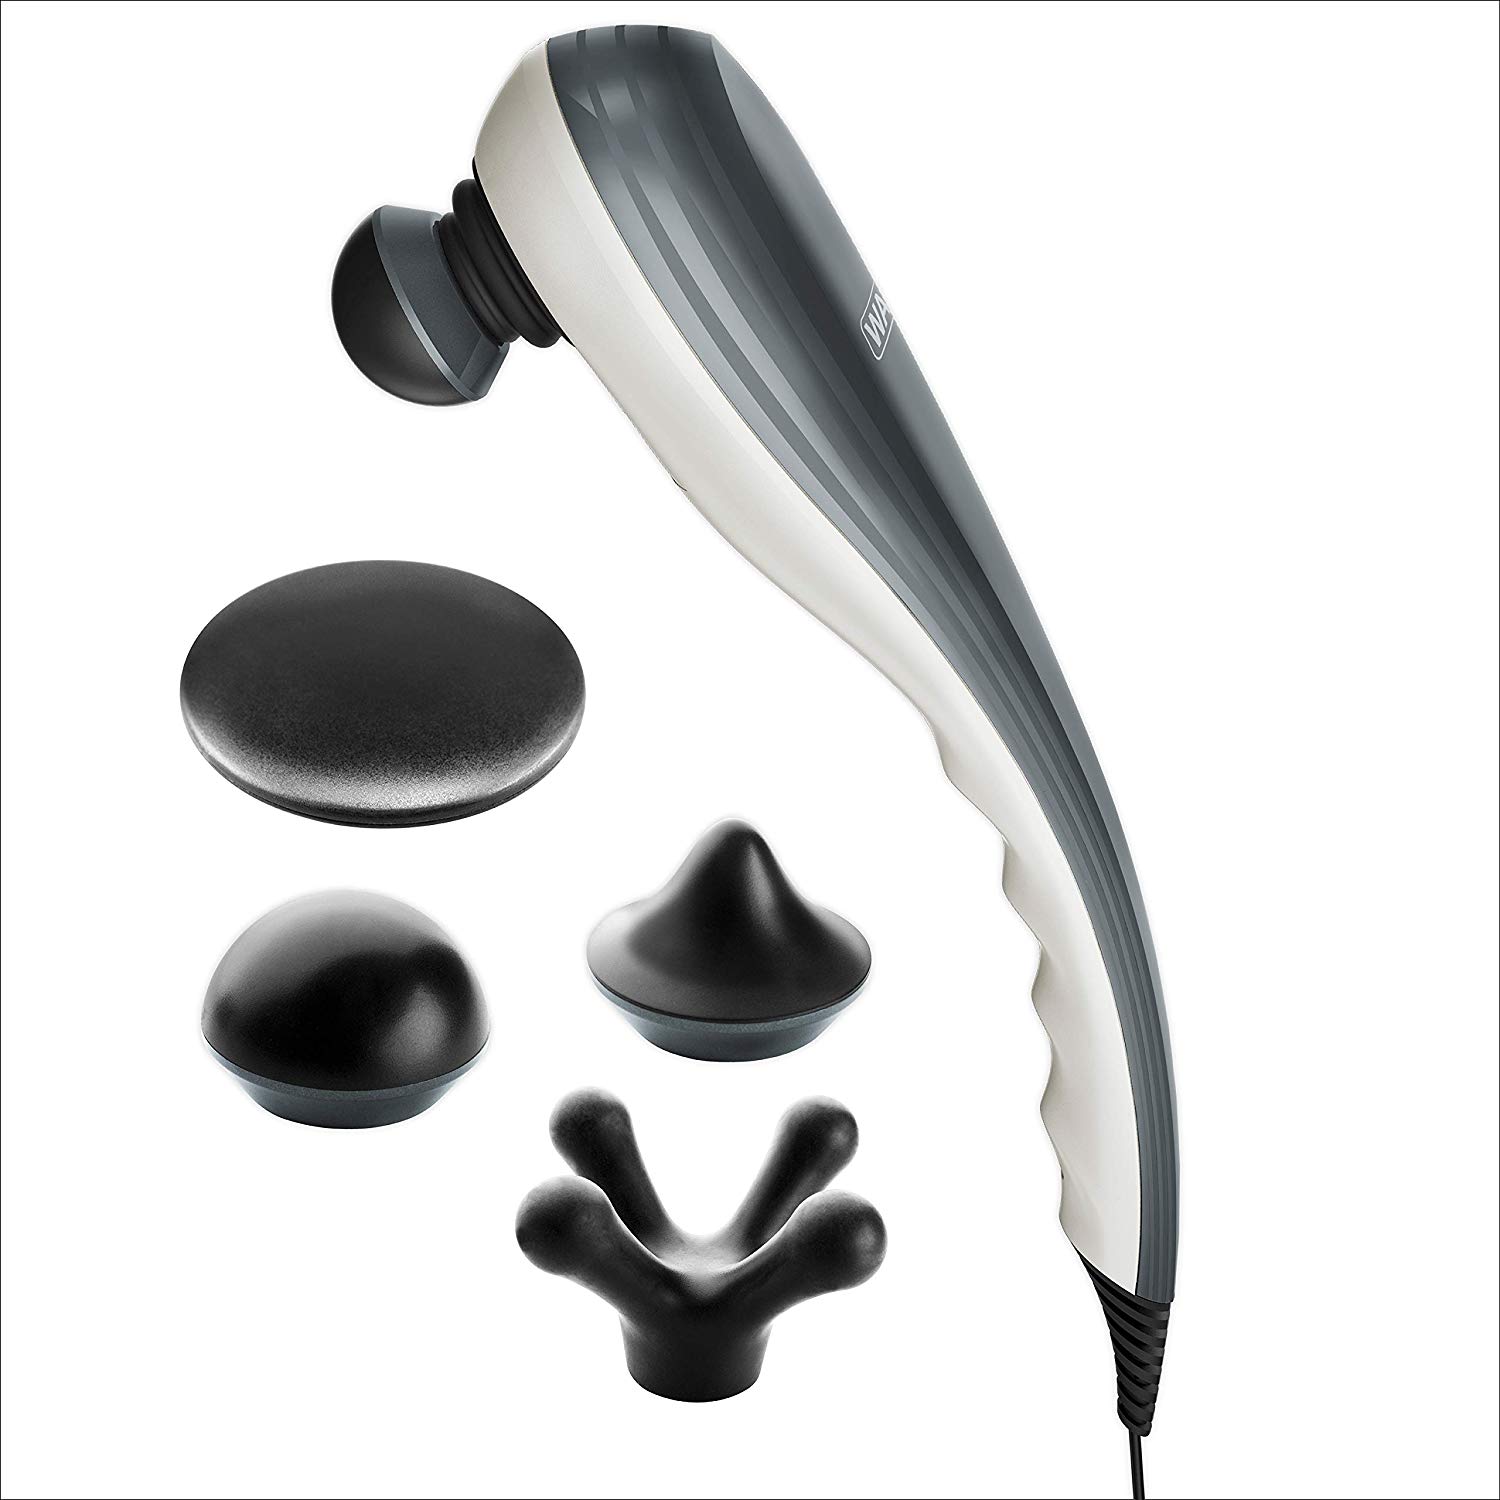 Wahl Deep Tissue Percussion Therapeutic Handheld Massager - Grey Metallic - Has Variable Intensity to Releive Pain in The Back, Neck, Shoulders, Muscles - The Brand Used by Professionals - 4290-2001